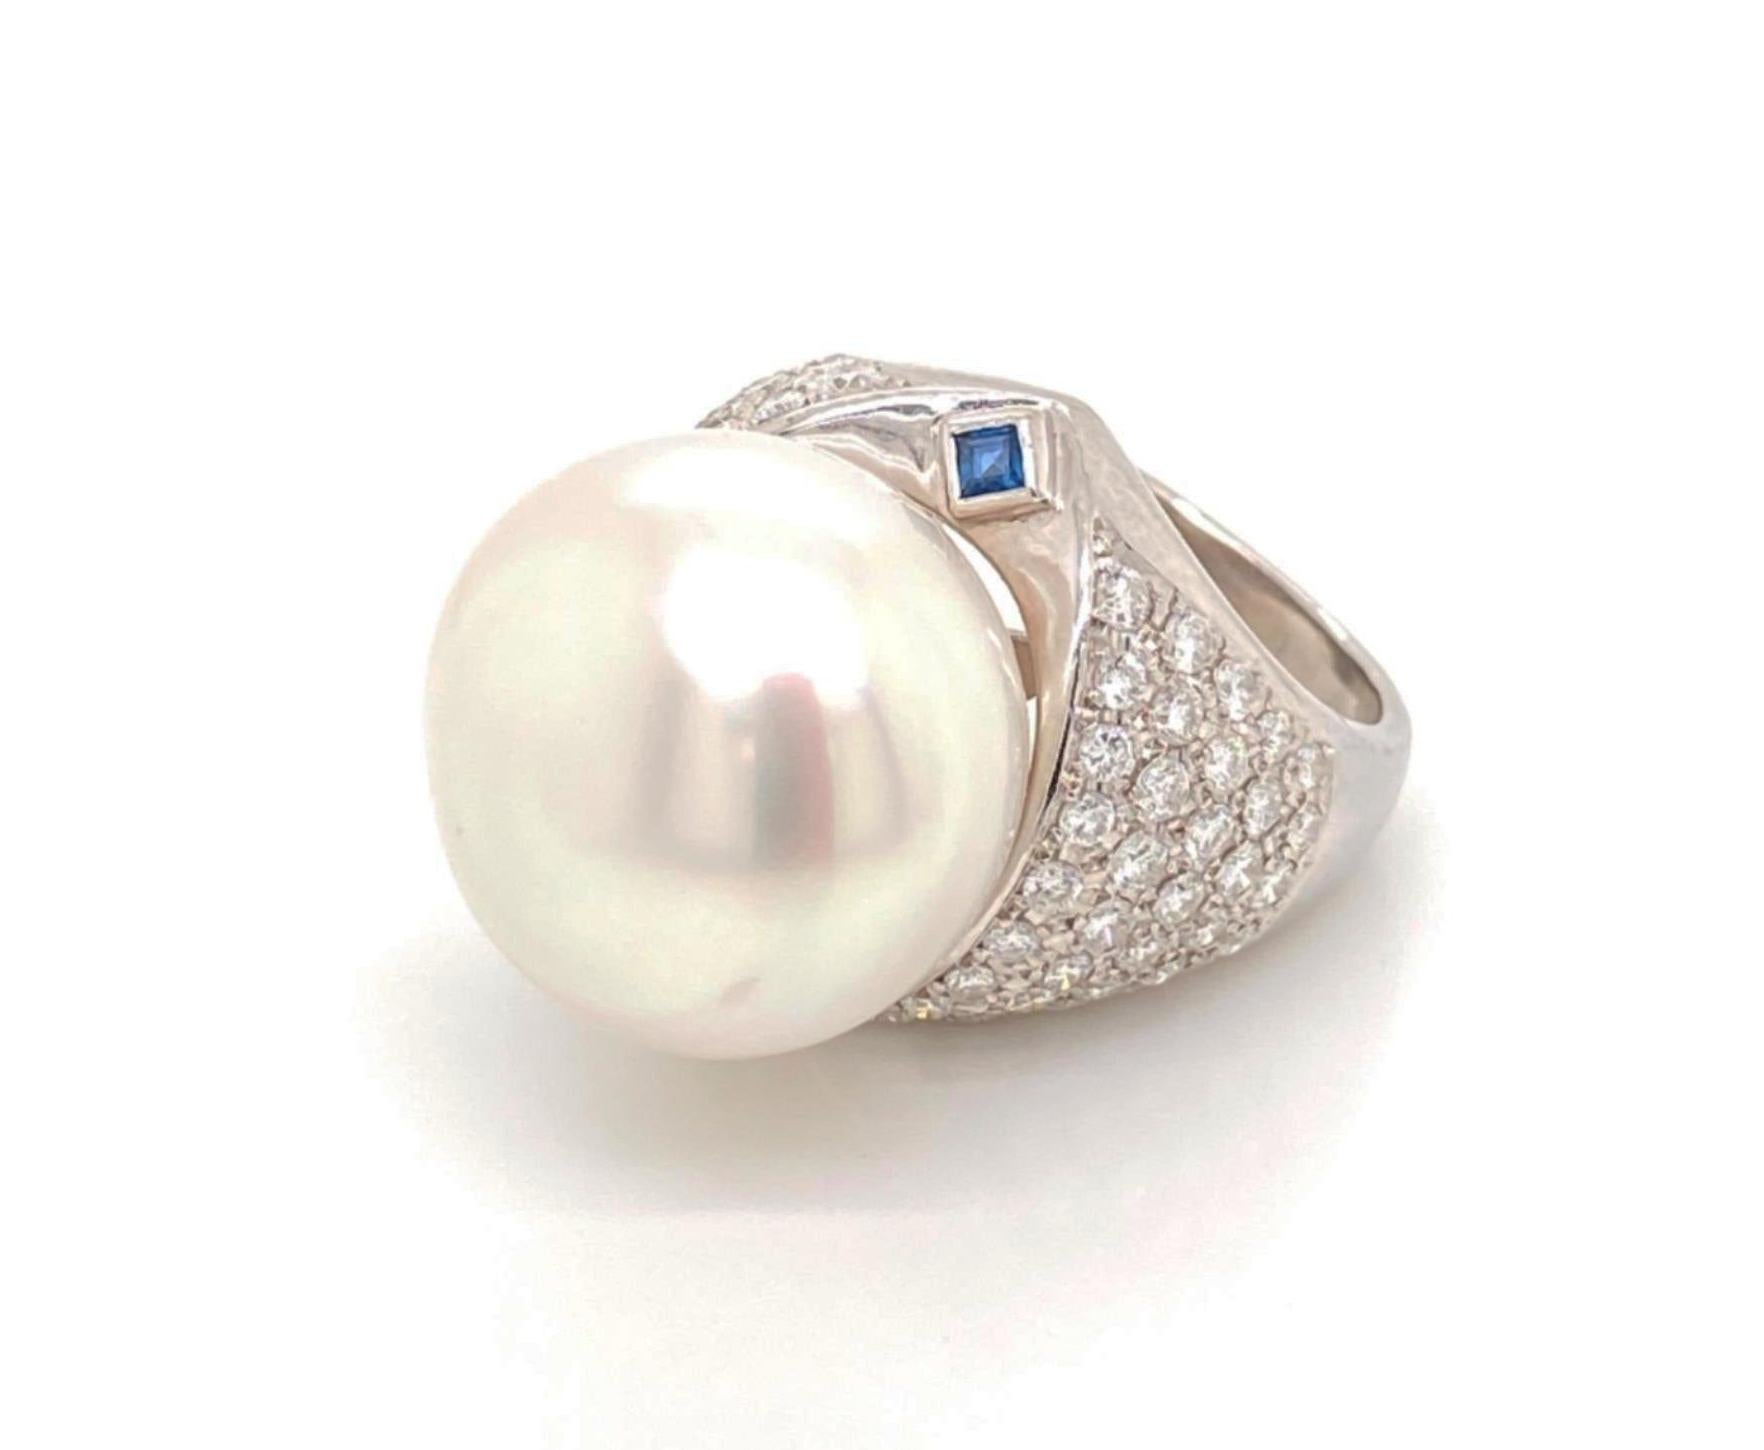 This is an eye catching impressive ring, it is crafted from 18k white gold featuring a large 18.3mm shimmering pearl sitting on top of a wide dome form with round cut diamonds, on each side of the top of the shank is a square cut bezel set sapphire